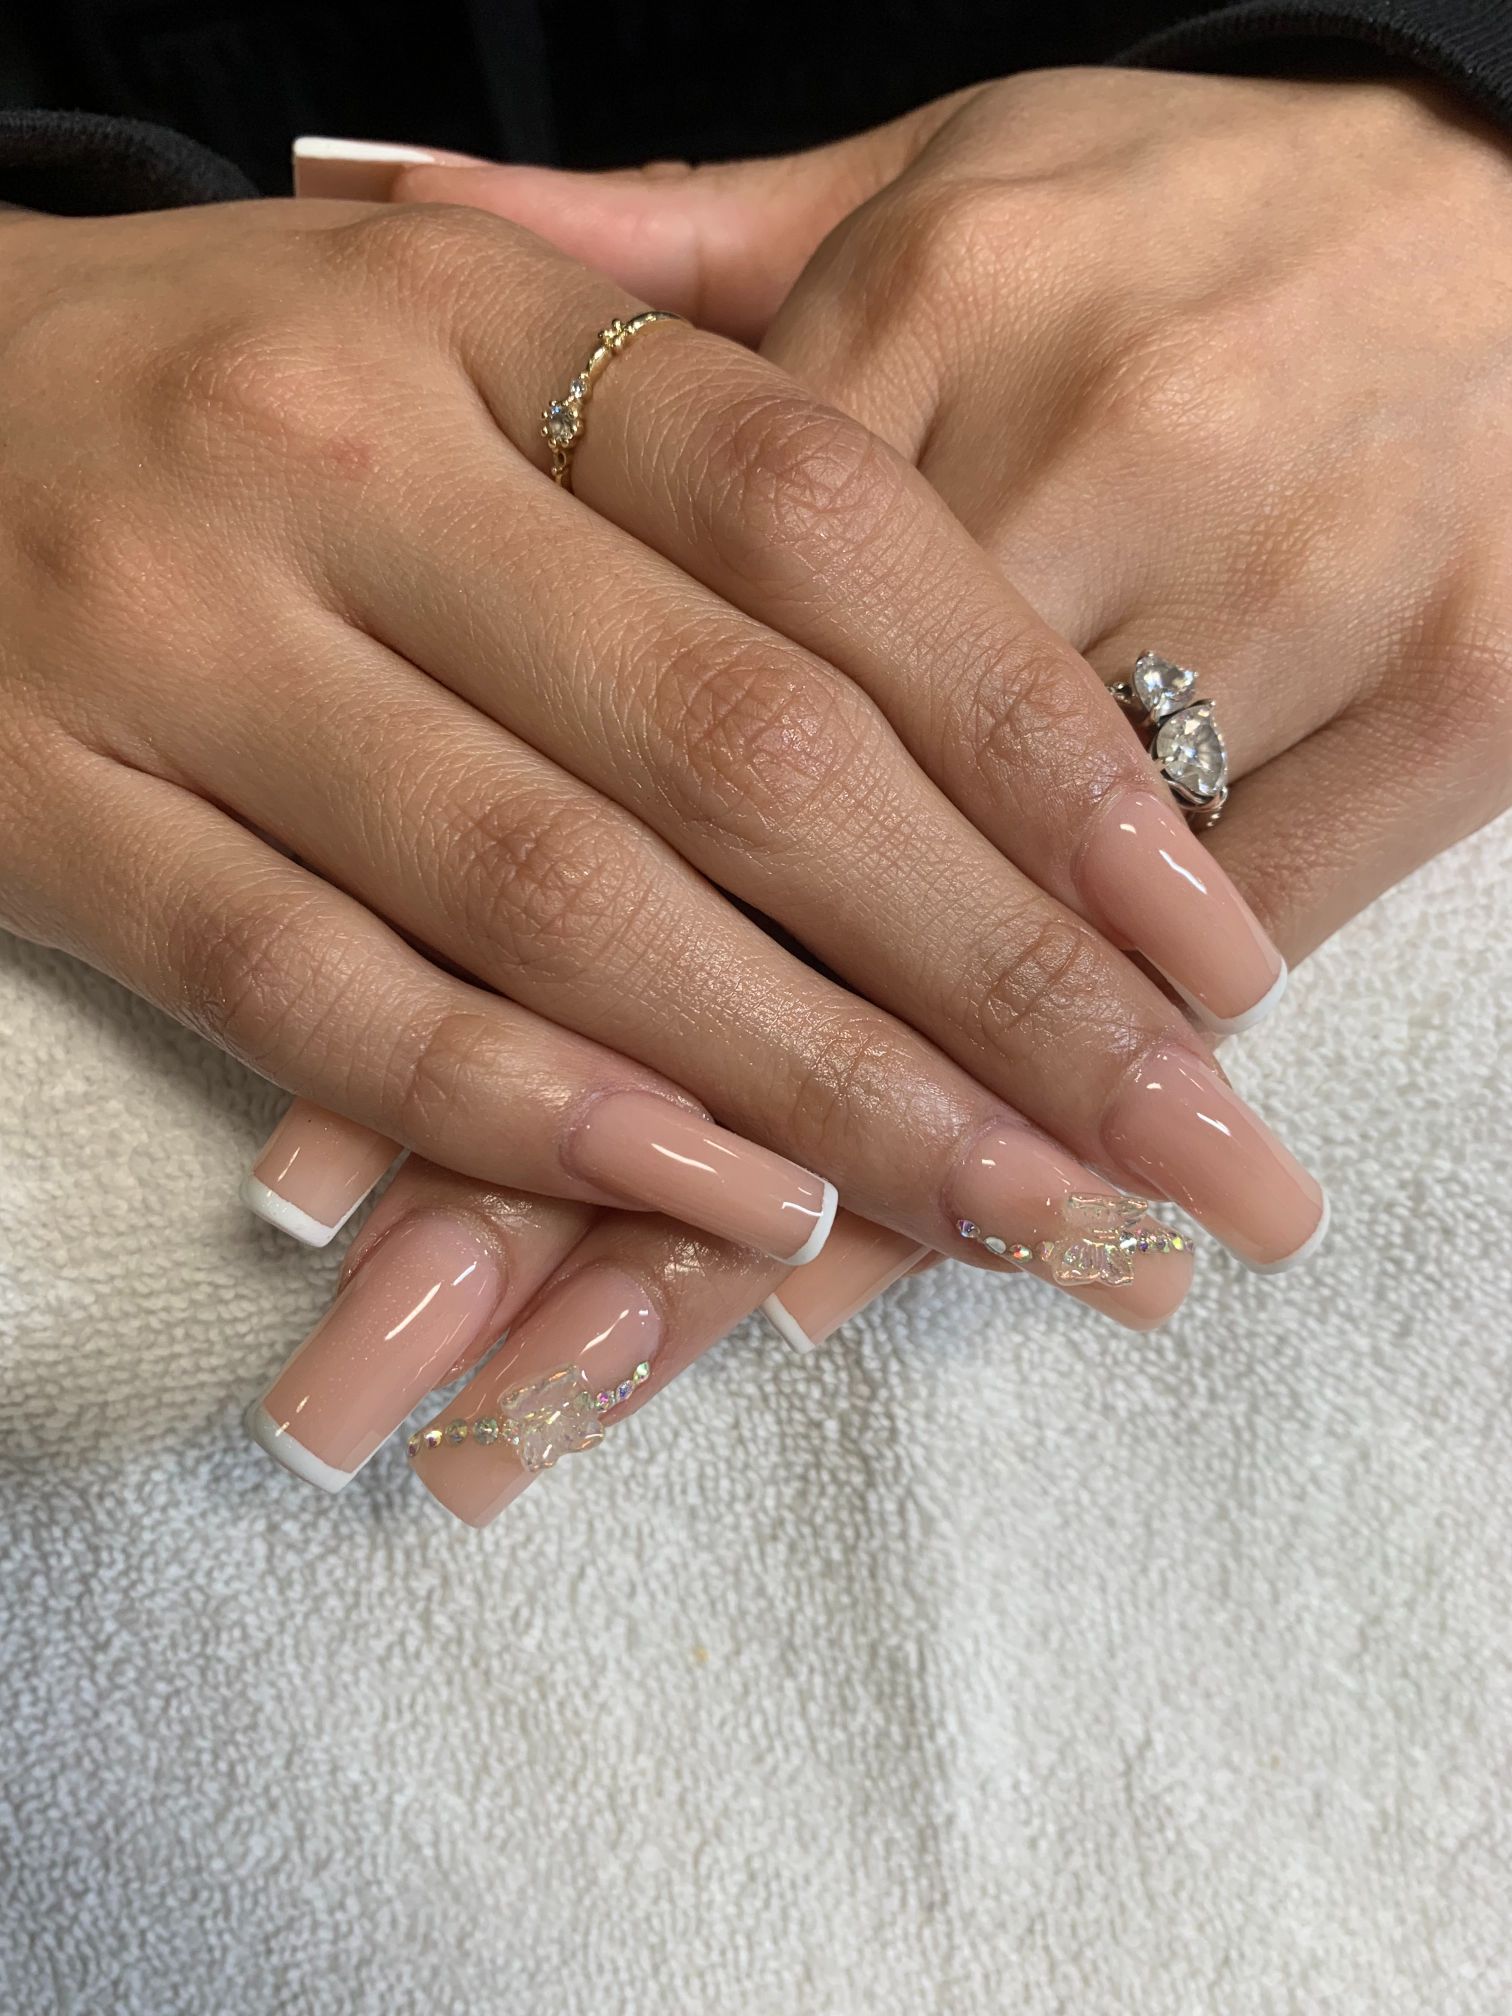 Nailtique - Beautiful Manicures and Pedicures